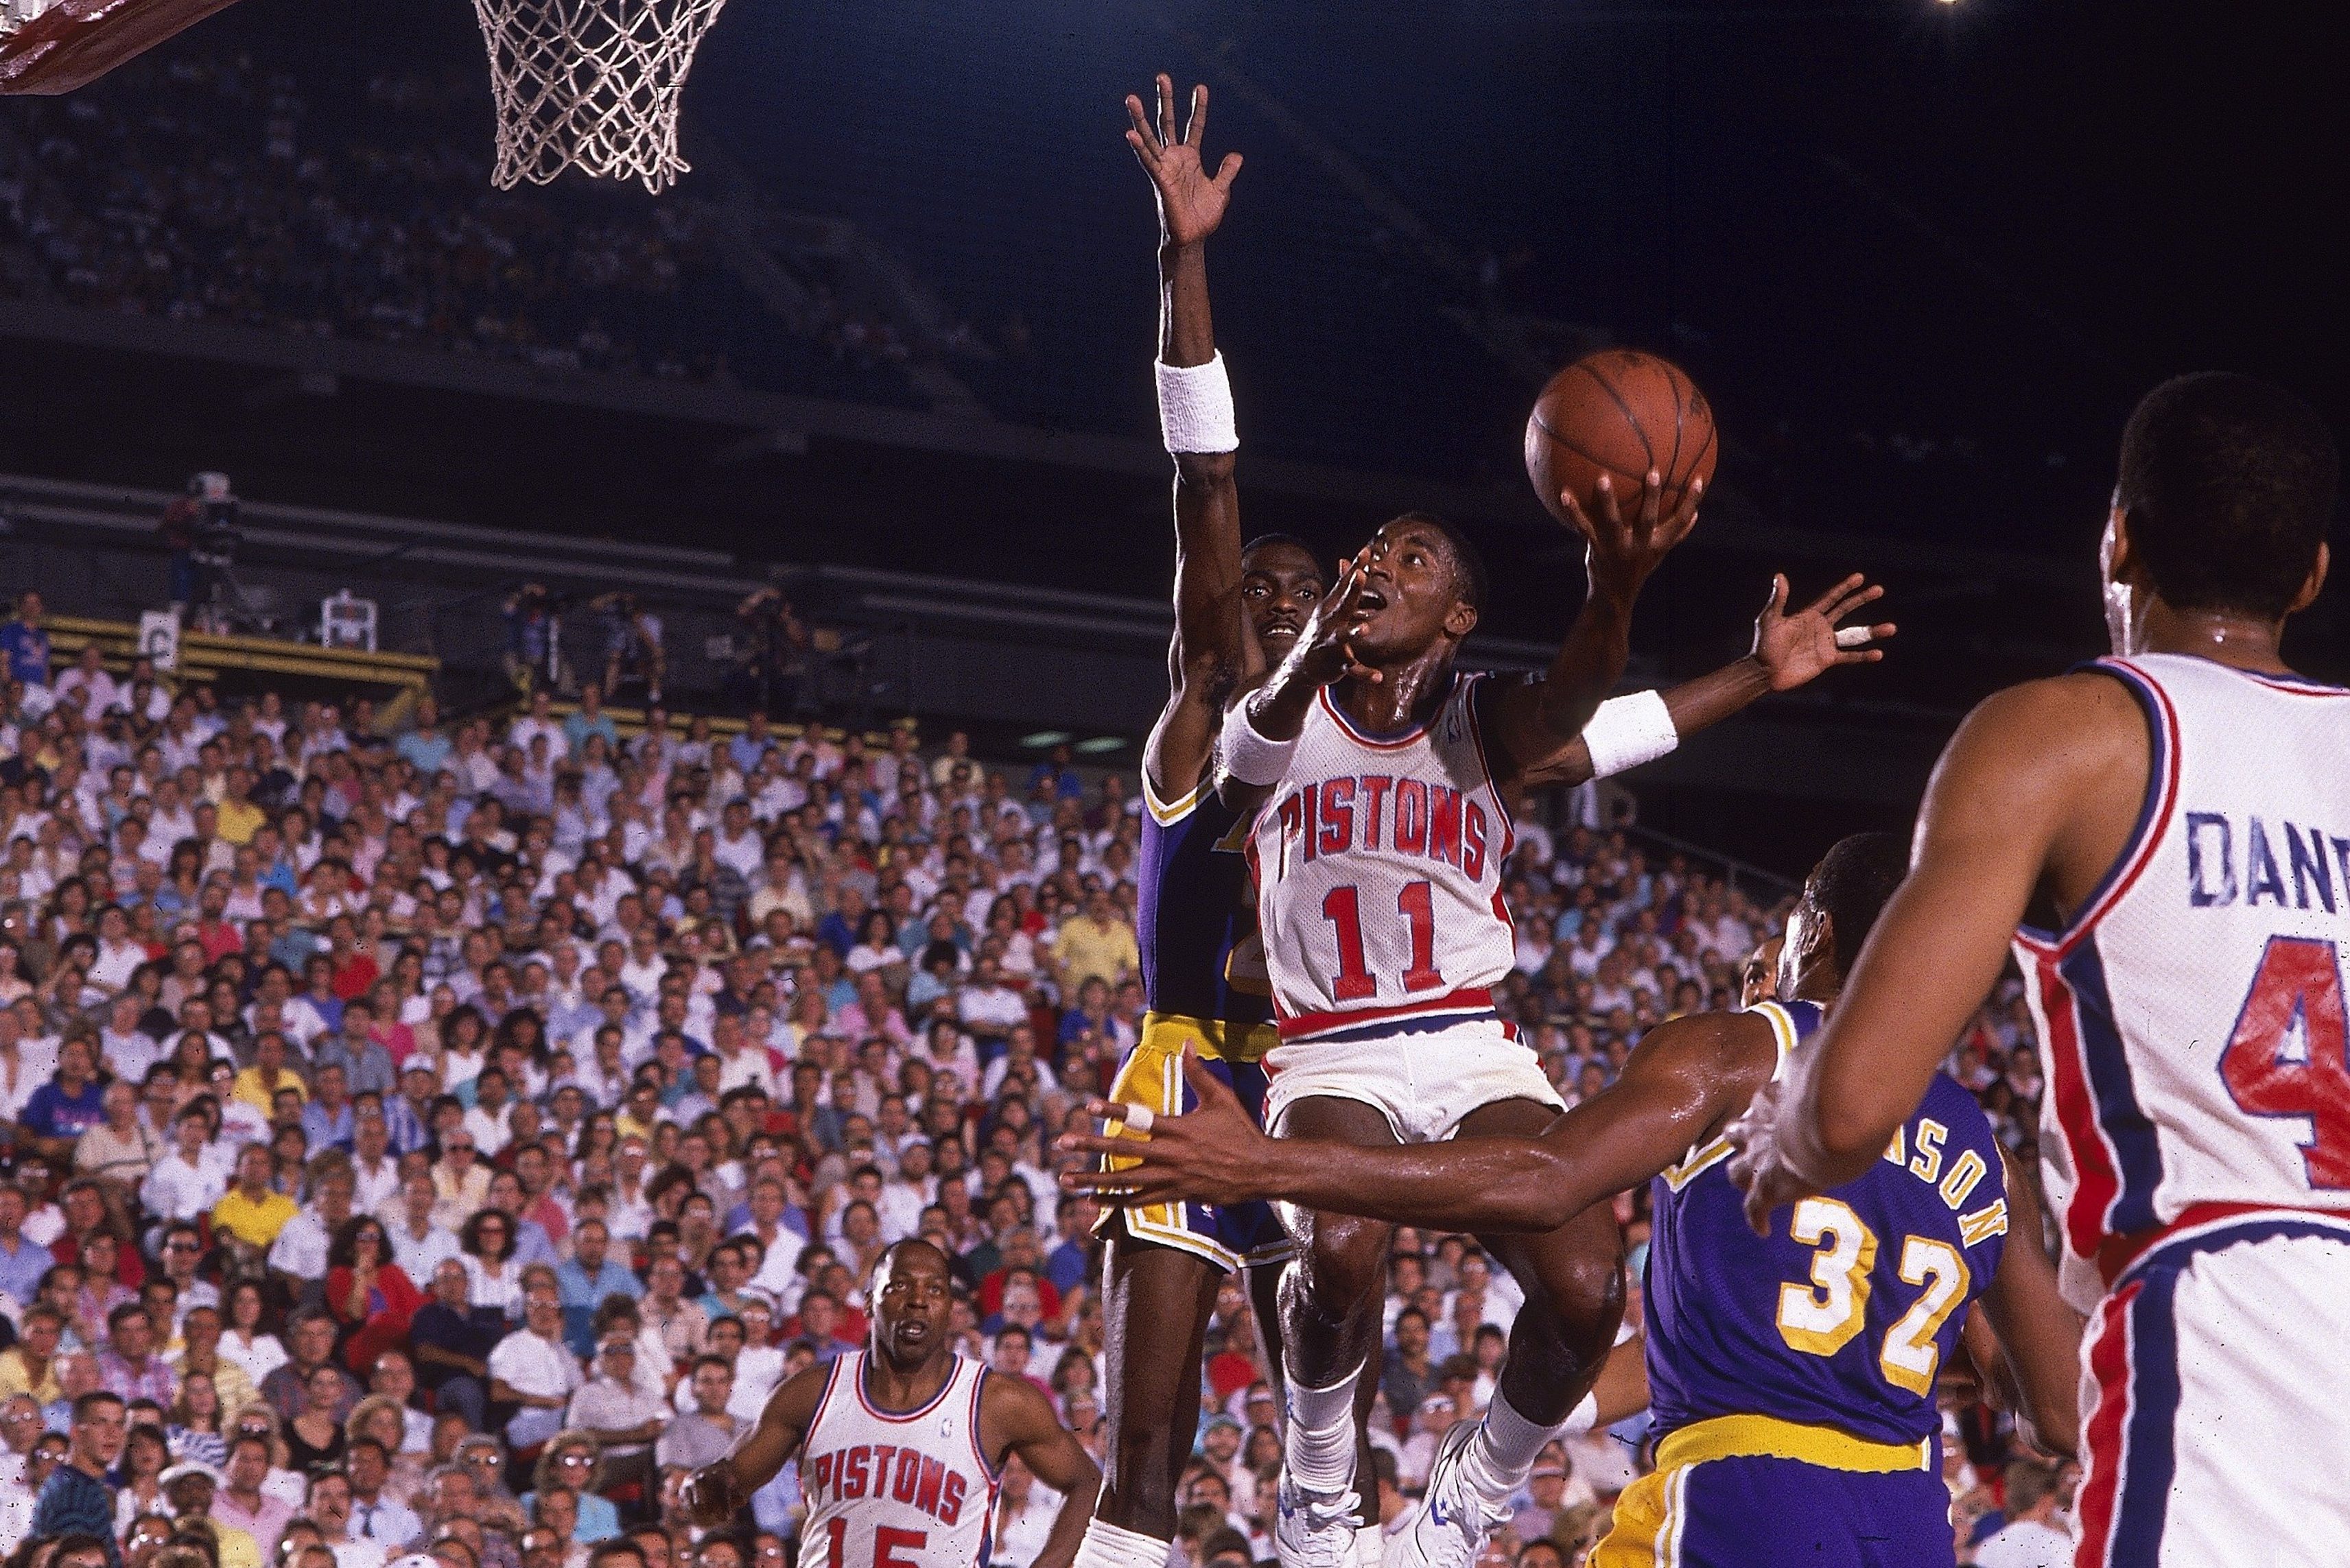 Isiah Thomas takes the ball to the hoop against the Los Angeles Lakers.